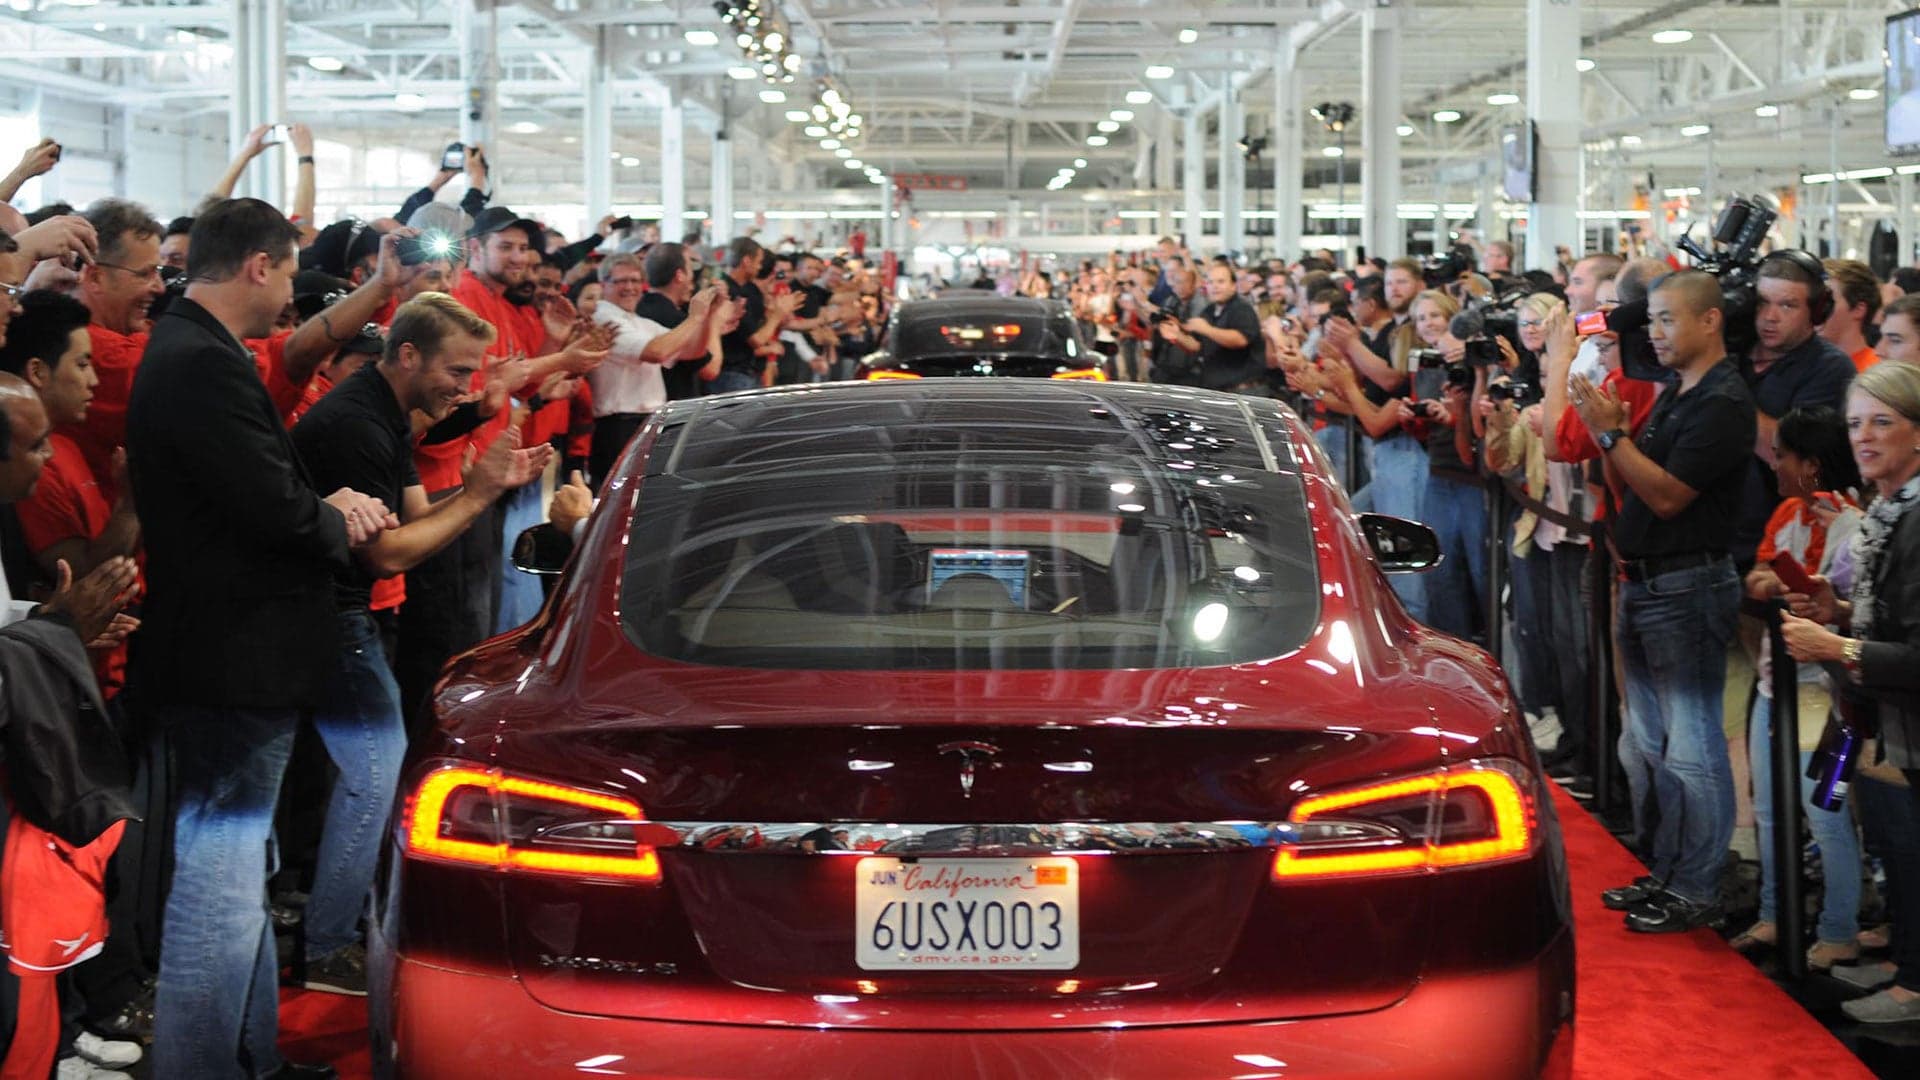 Tesla Plans to Upgrade Its Cars Every 12 to 18 Months, Elon Musk Says